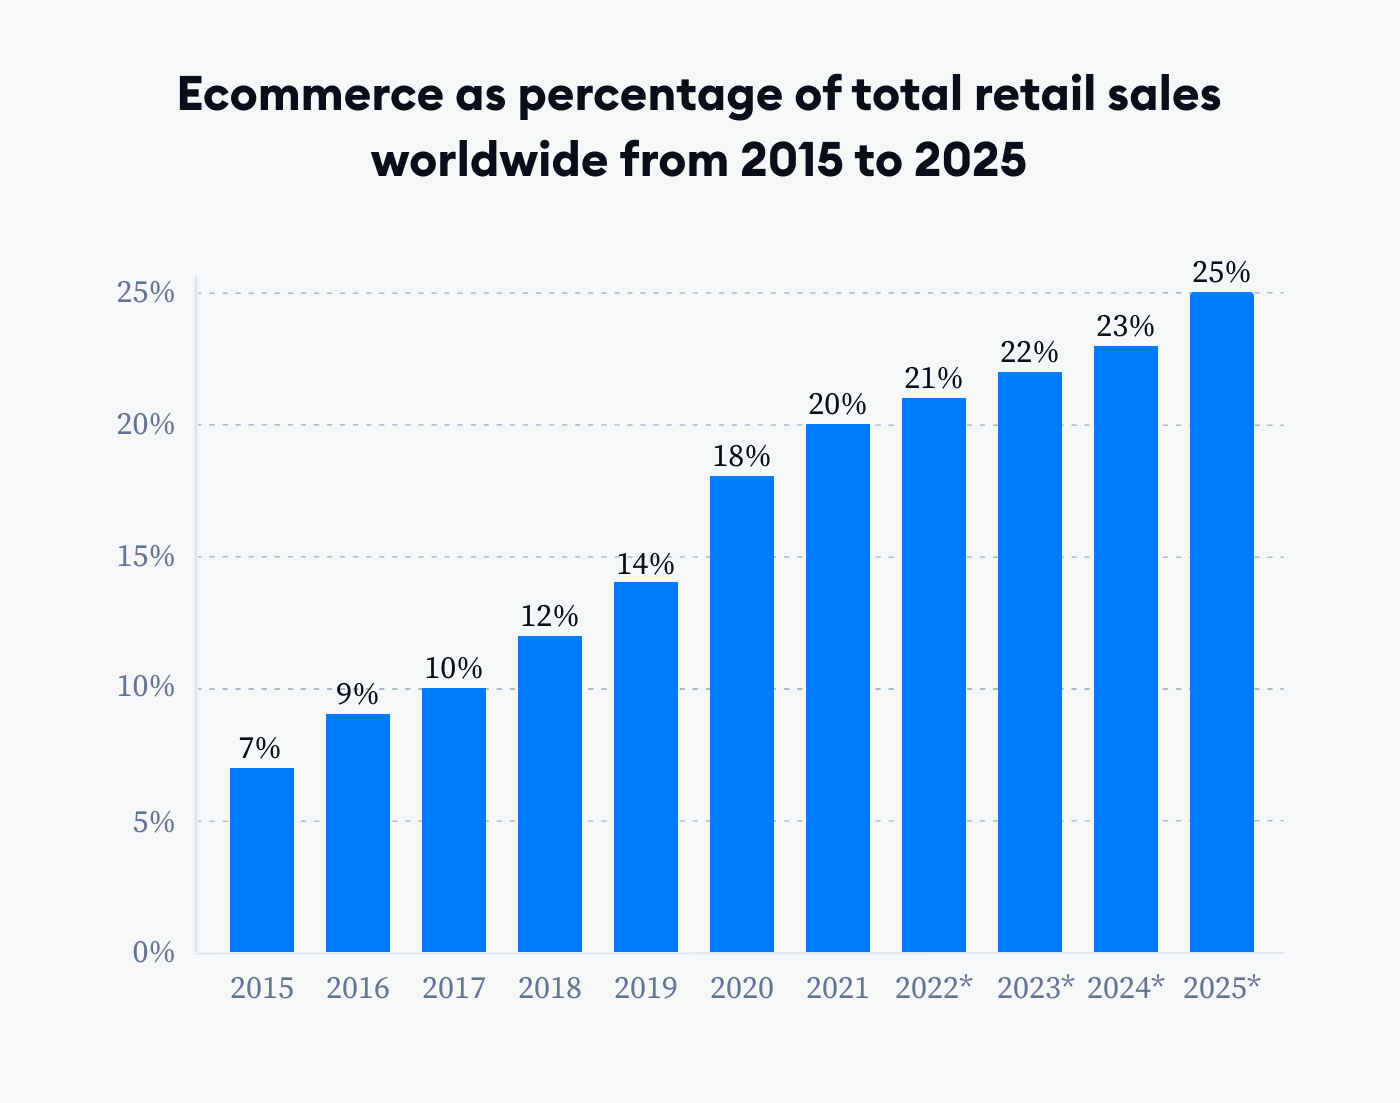 eCommerce as percentage of total retail sales worldwide from 2015 to 2025